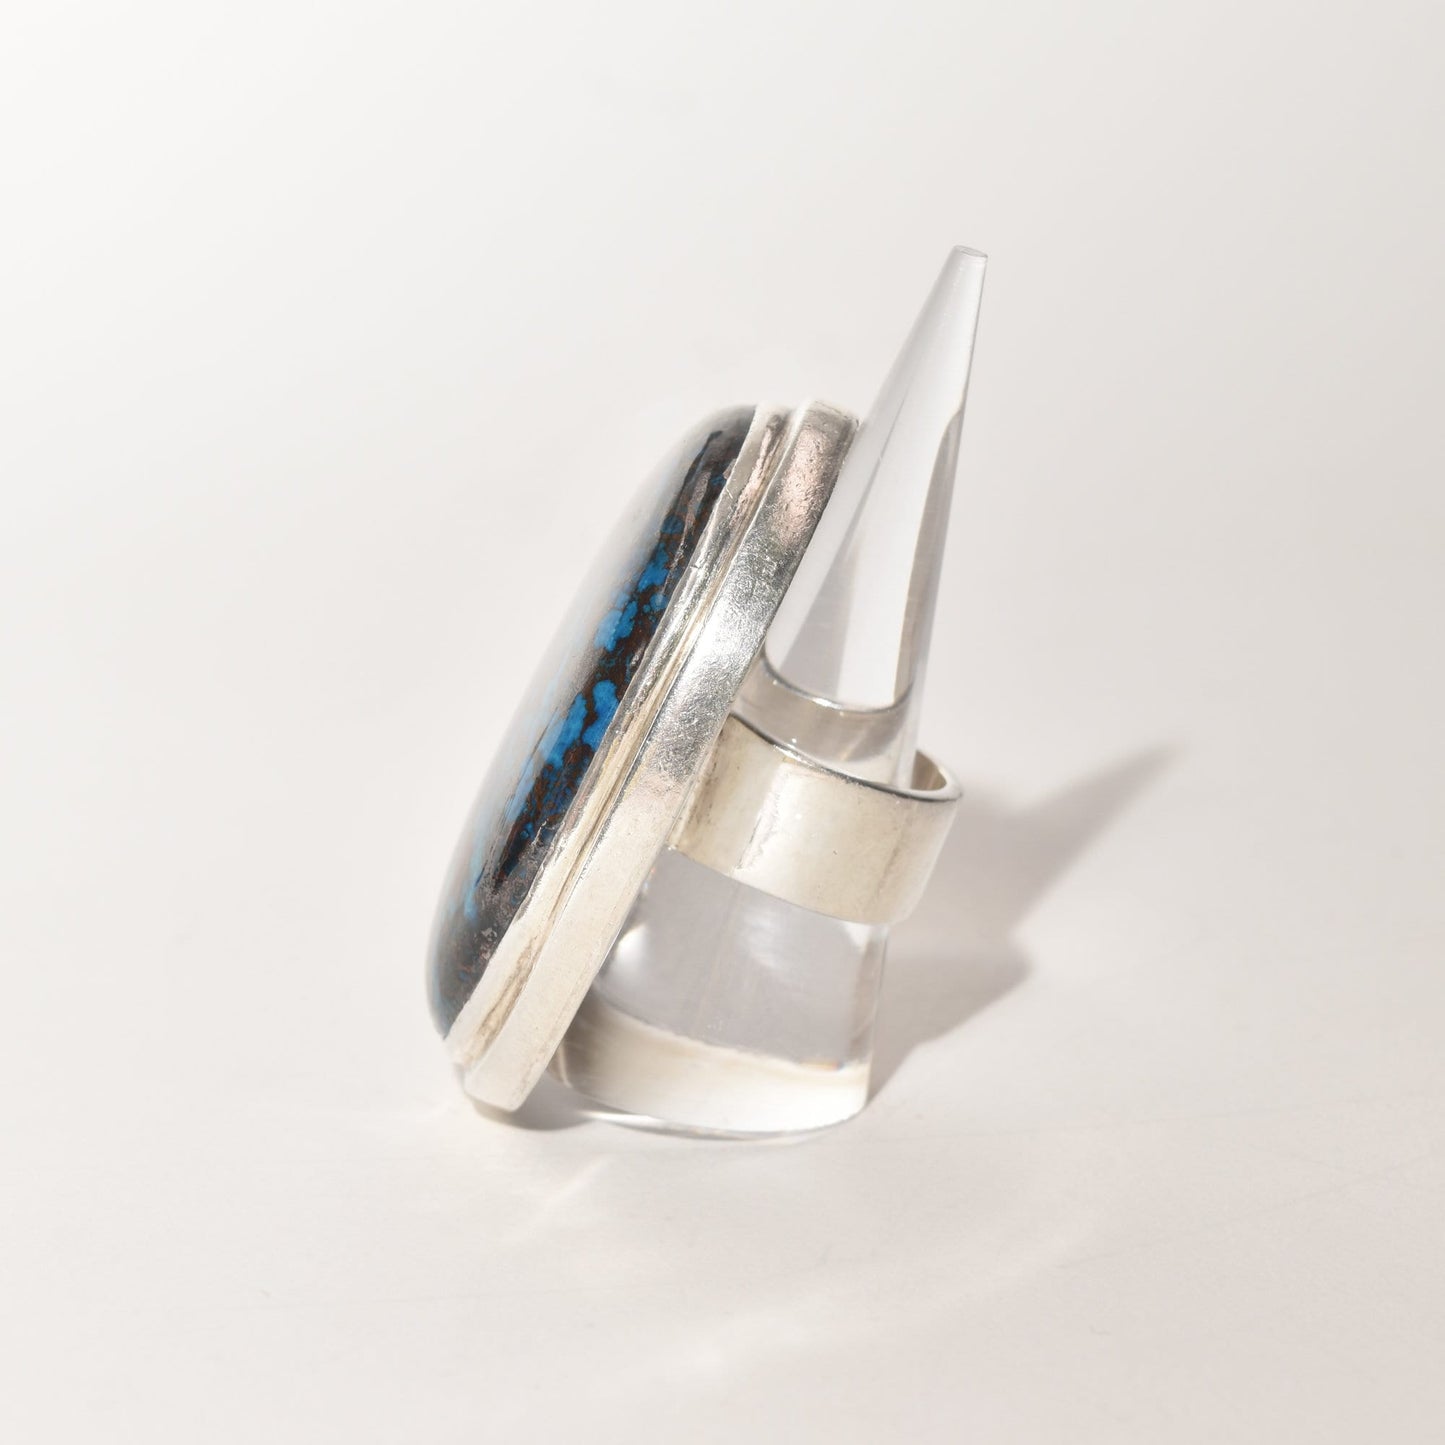 Huge sterling silver statement ring with blue matrix cabochon gemstone, size 7 3/4 US, on white background.